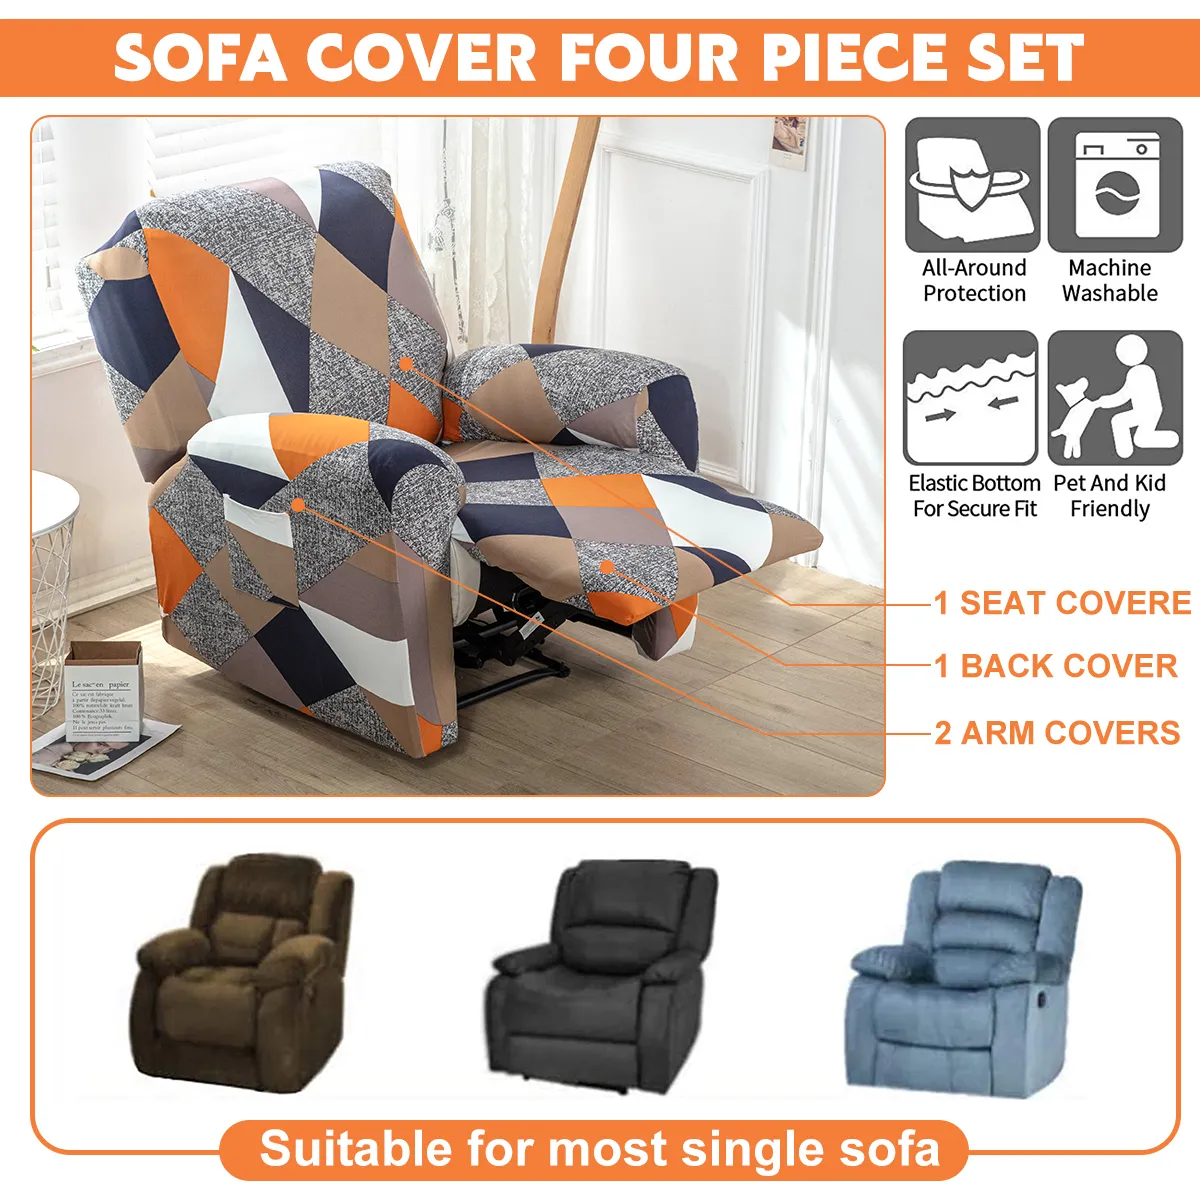 4pcs High Stretch Reckin Cover Sofa Scecover Single Seat Soft Brepid Imprimé Couvre-chaise inclinable Meubles Protecteur